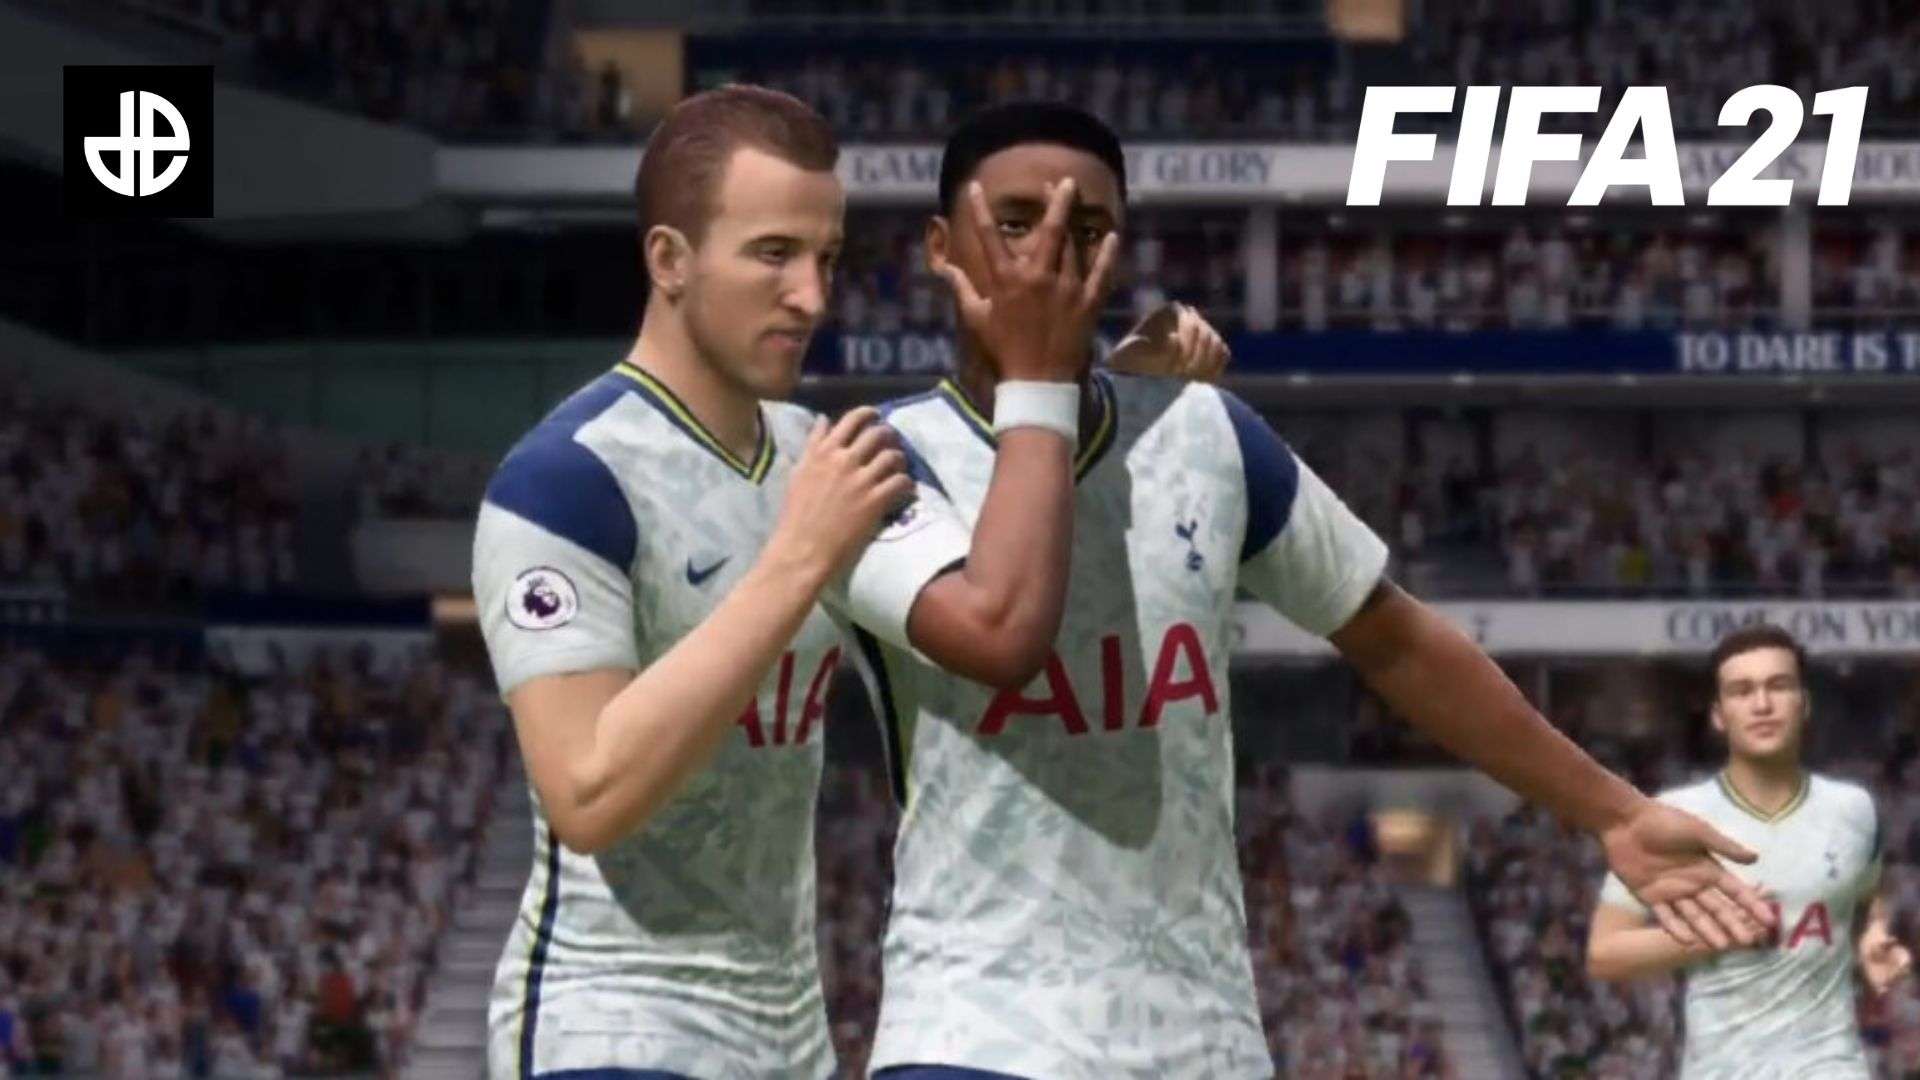 Spurs players celebrating in FIFA